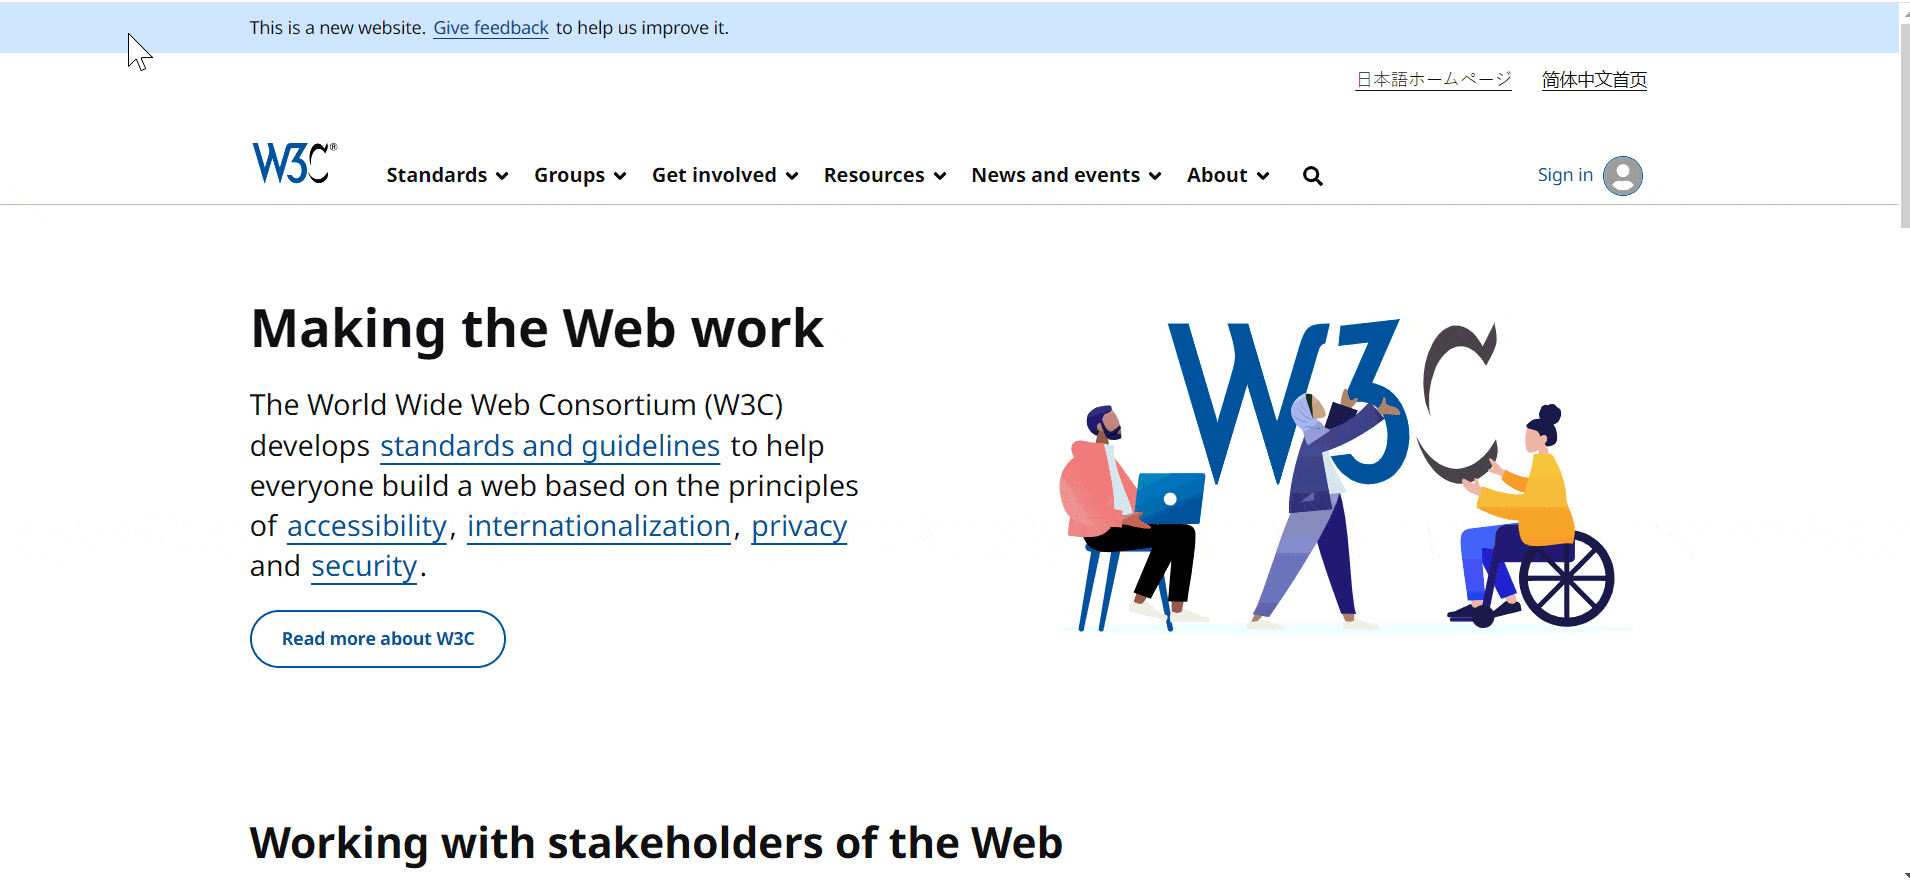 W3C website homepage example for keyboard navigation with the focus indicator highlighting where the cursor is.